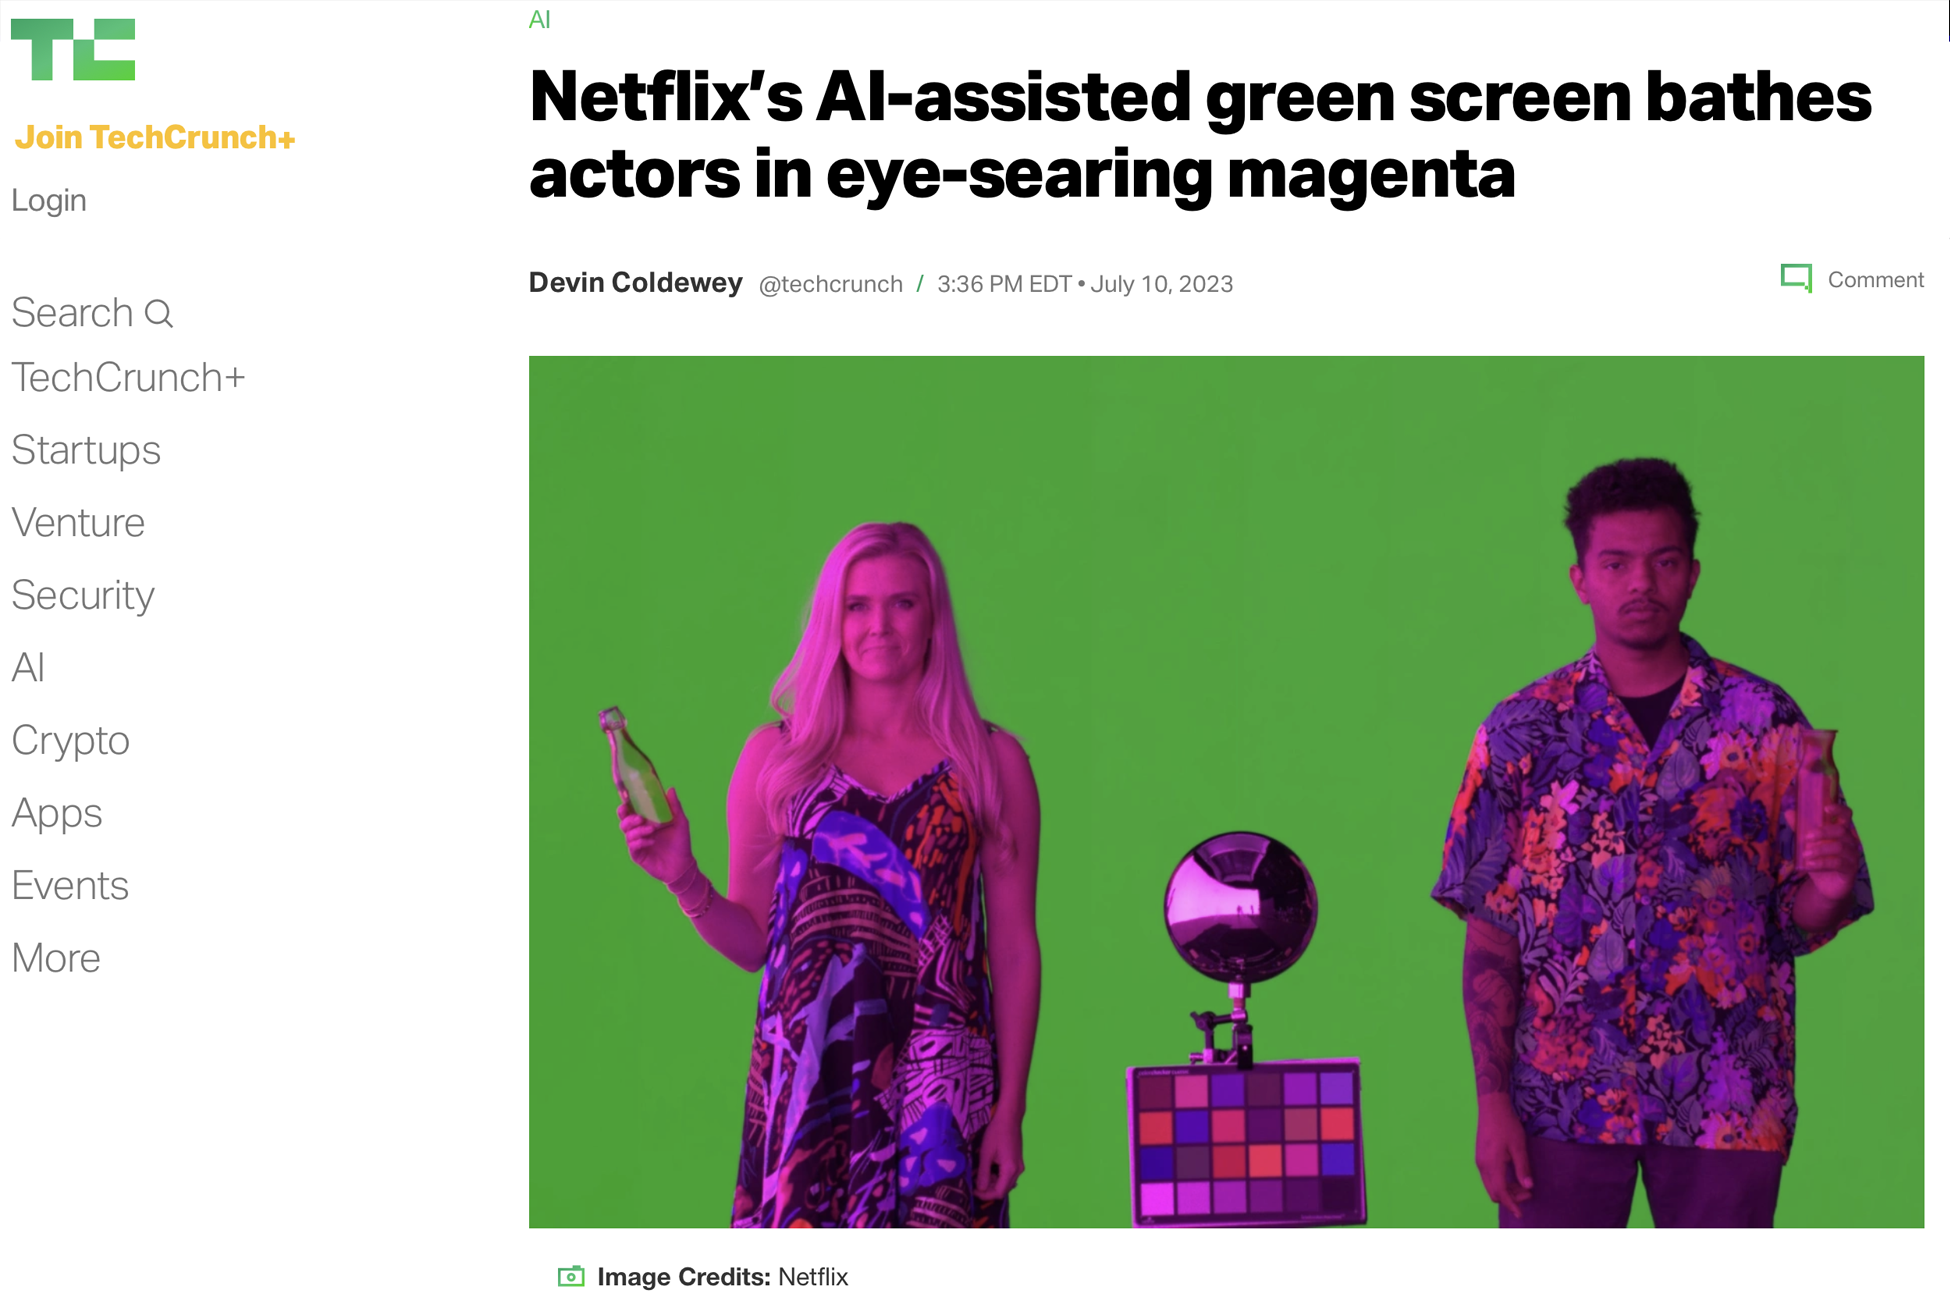 Netflix’s AI-assisted green screen bathes actors in eye-searing magenta